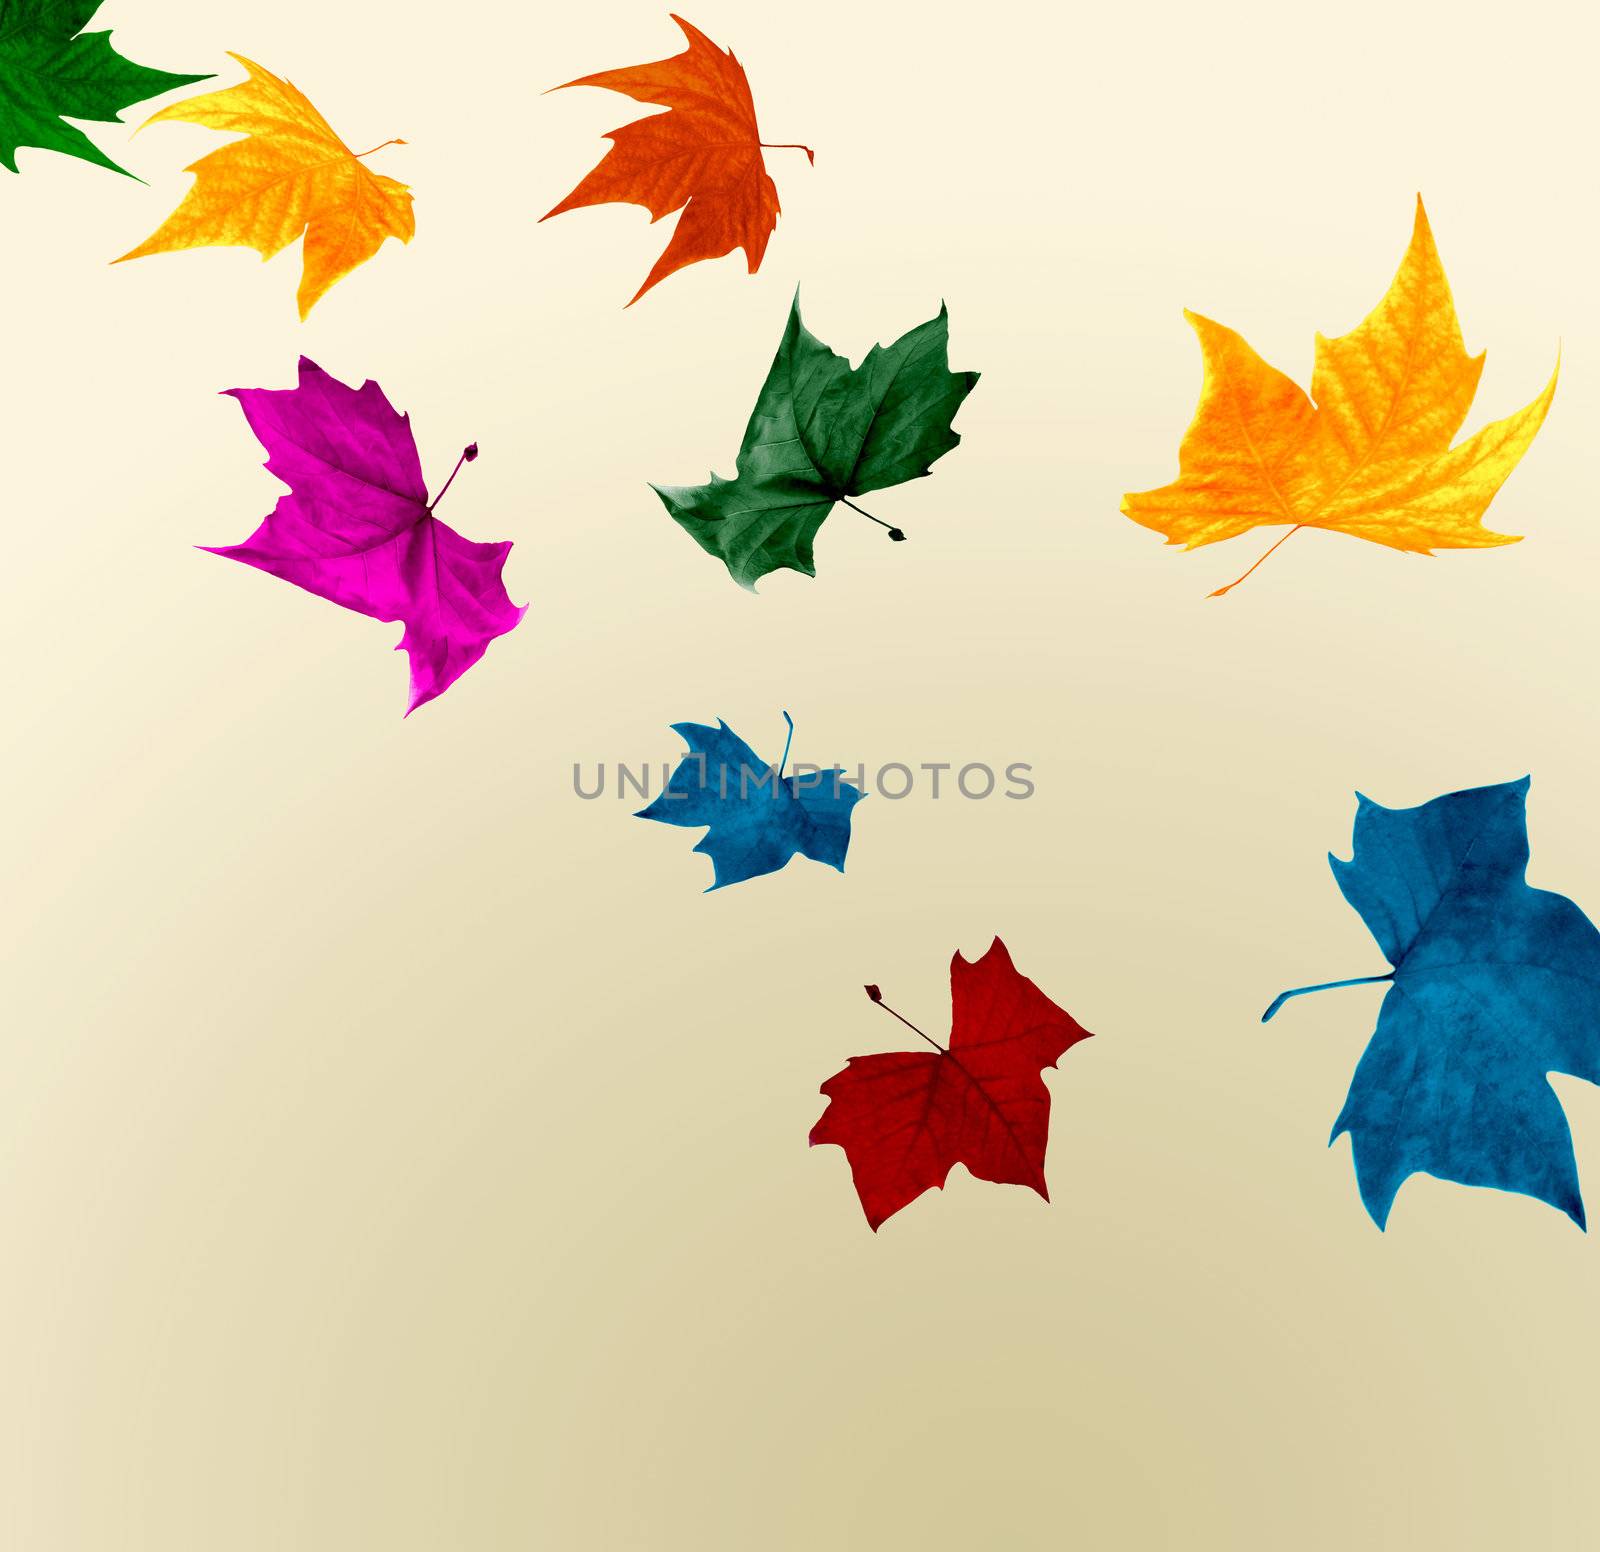 Autumn leaves flying  shocking colors 